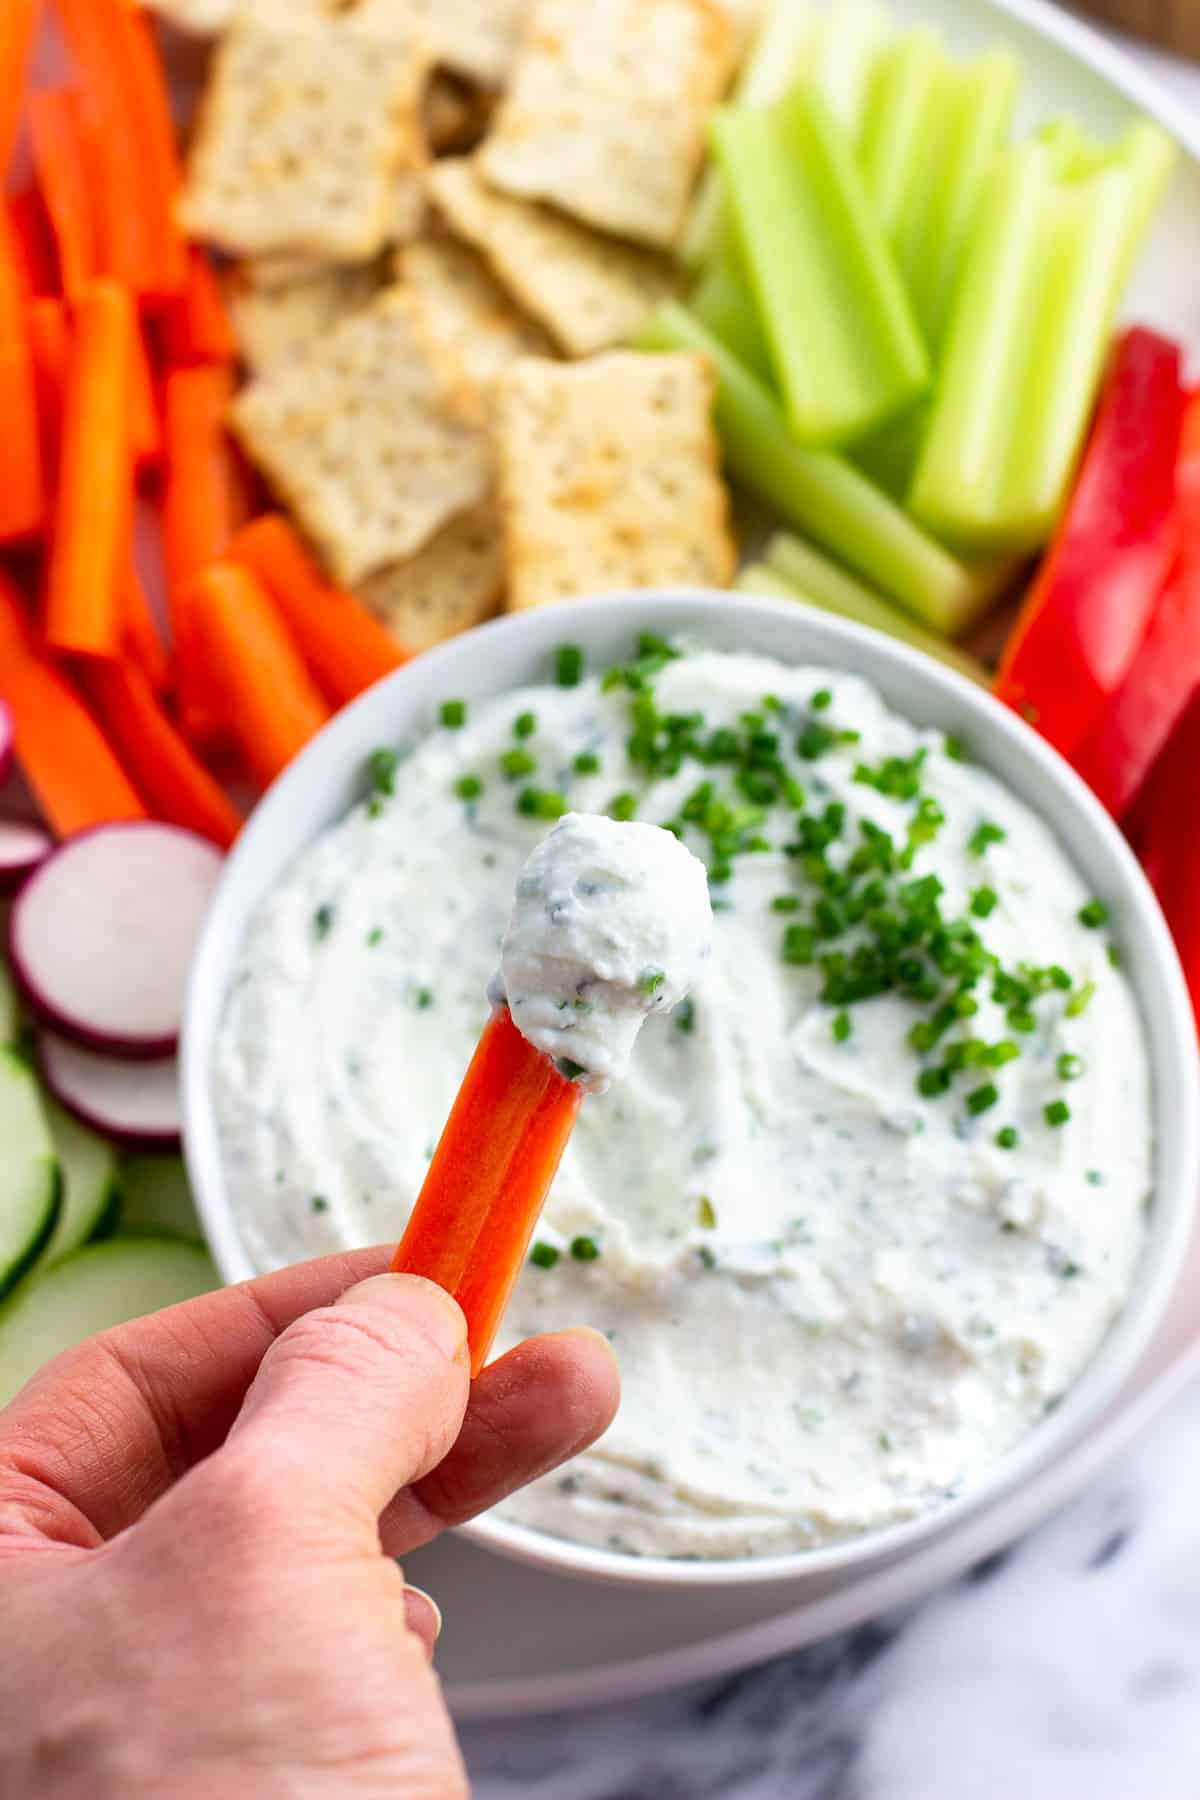 A carrot stick dipped into cottage cheese dip.